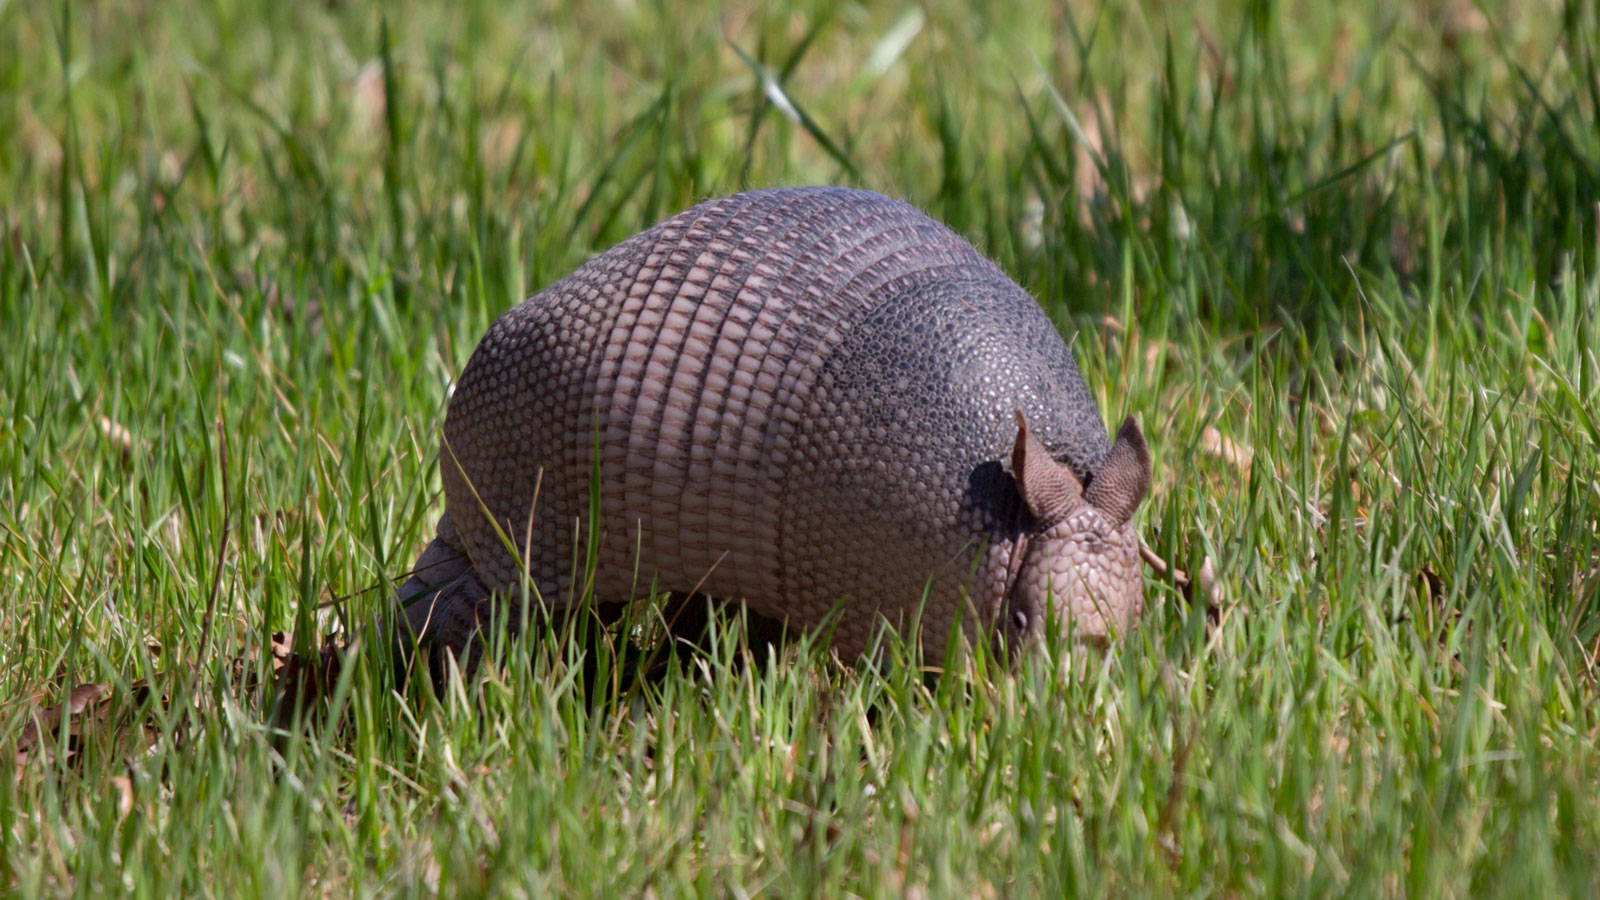 Nine-Banded armadillo foraging in grass